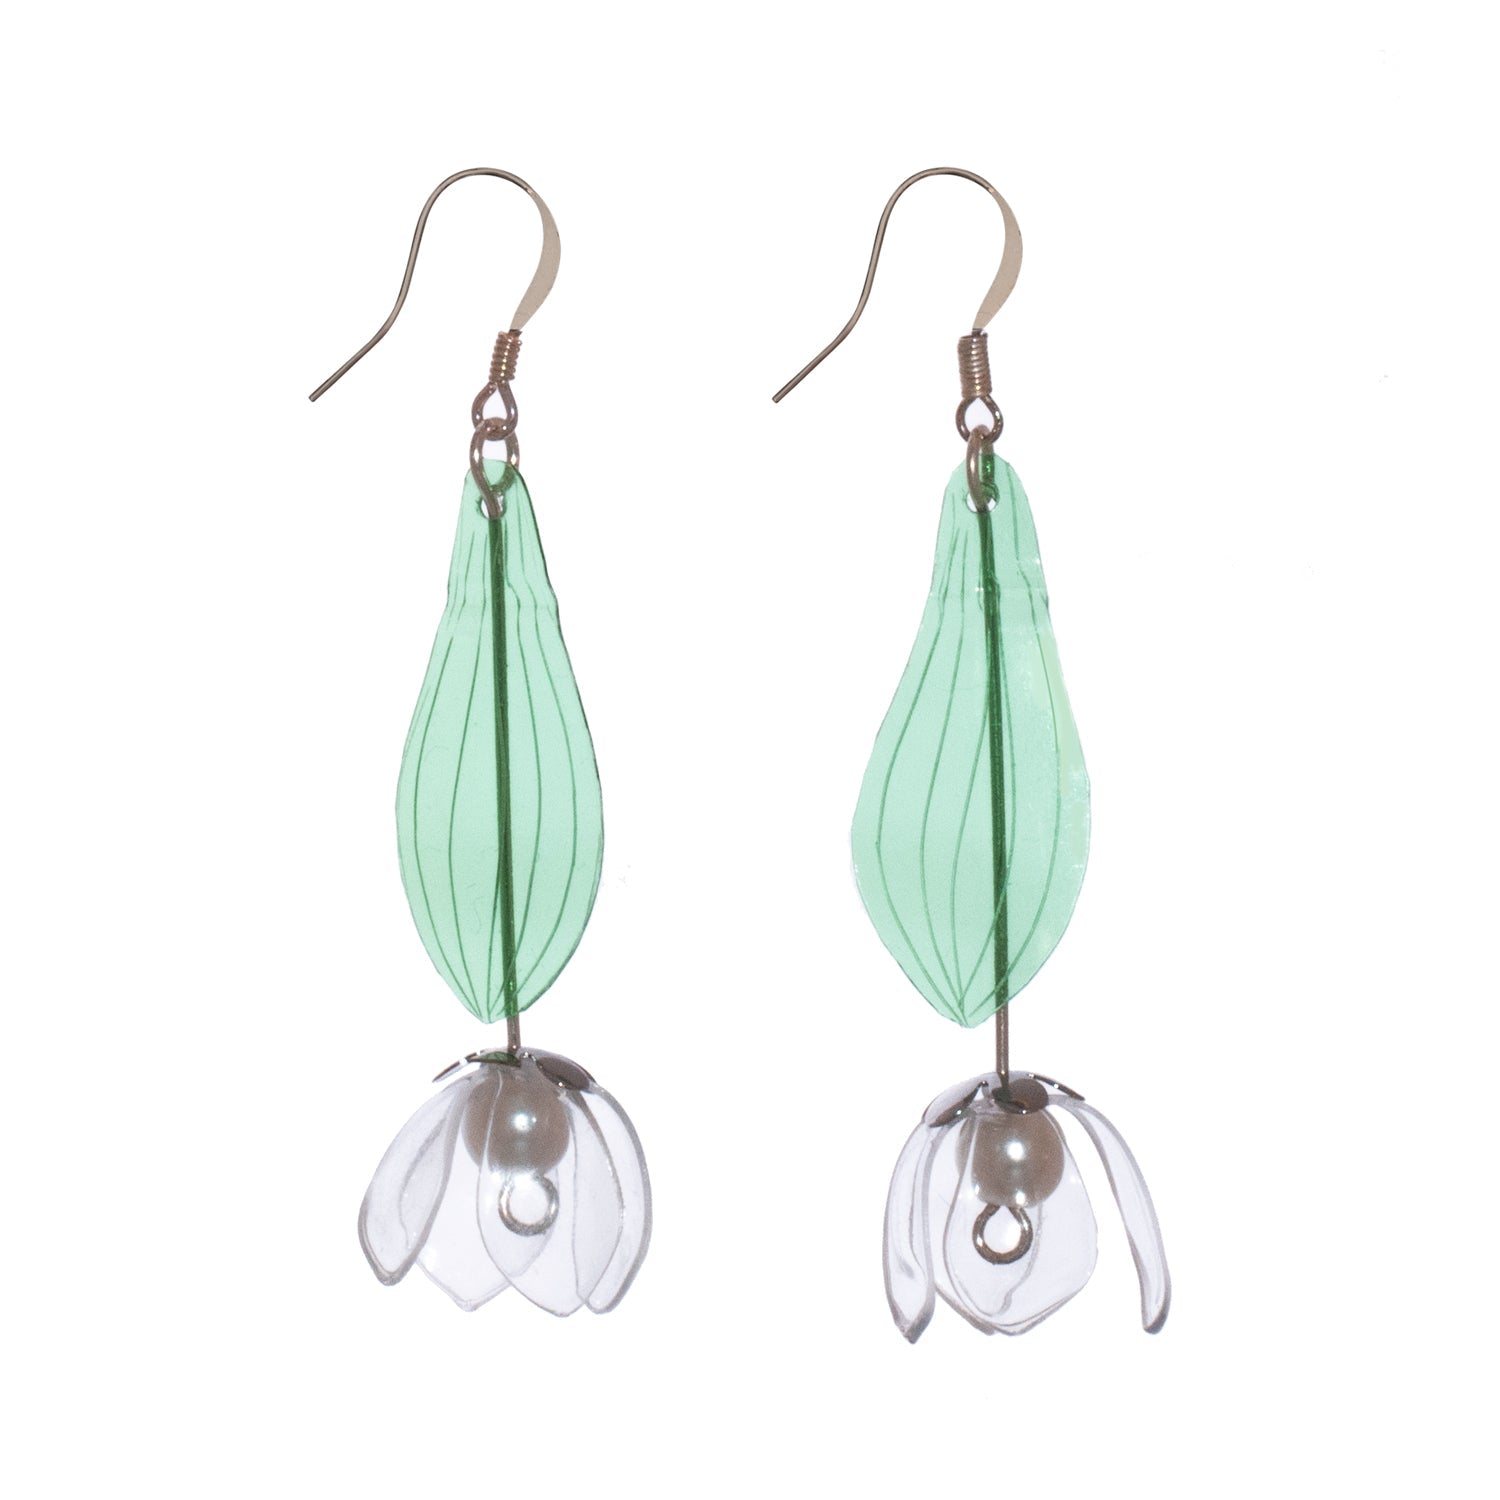 Blumenohrringe – Maiglöckchen - Just a Flower Earrings - Lily of the Valley-1